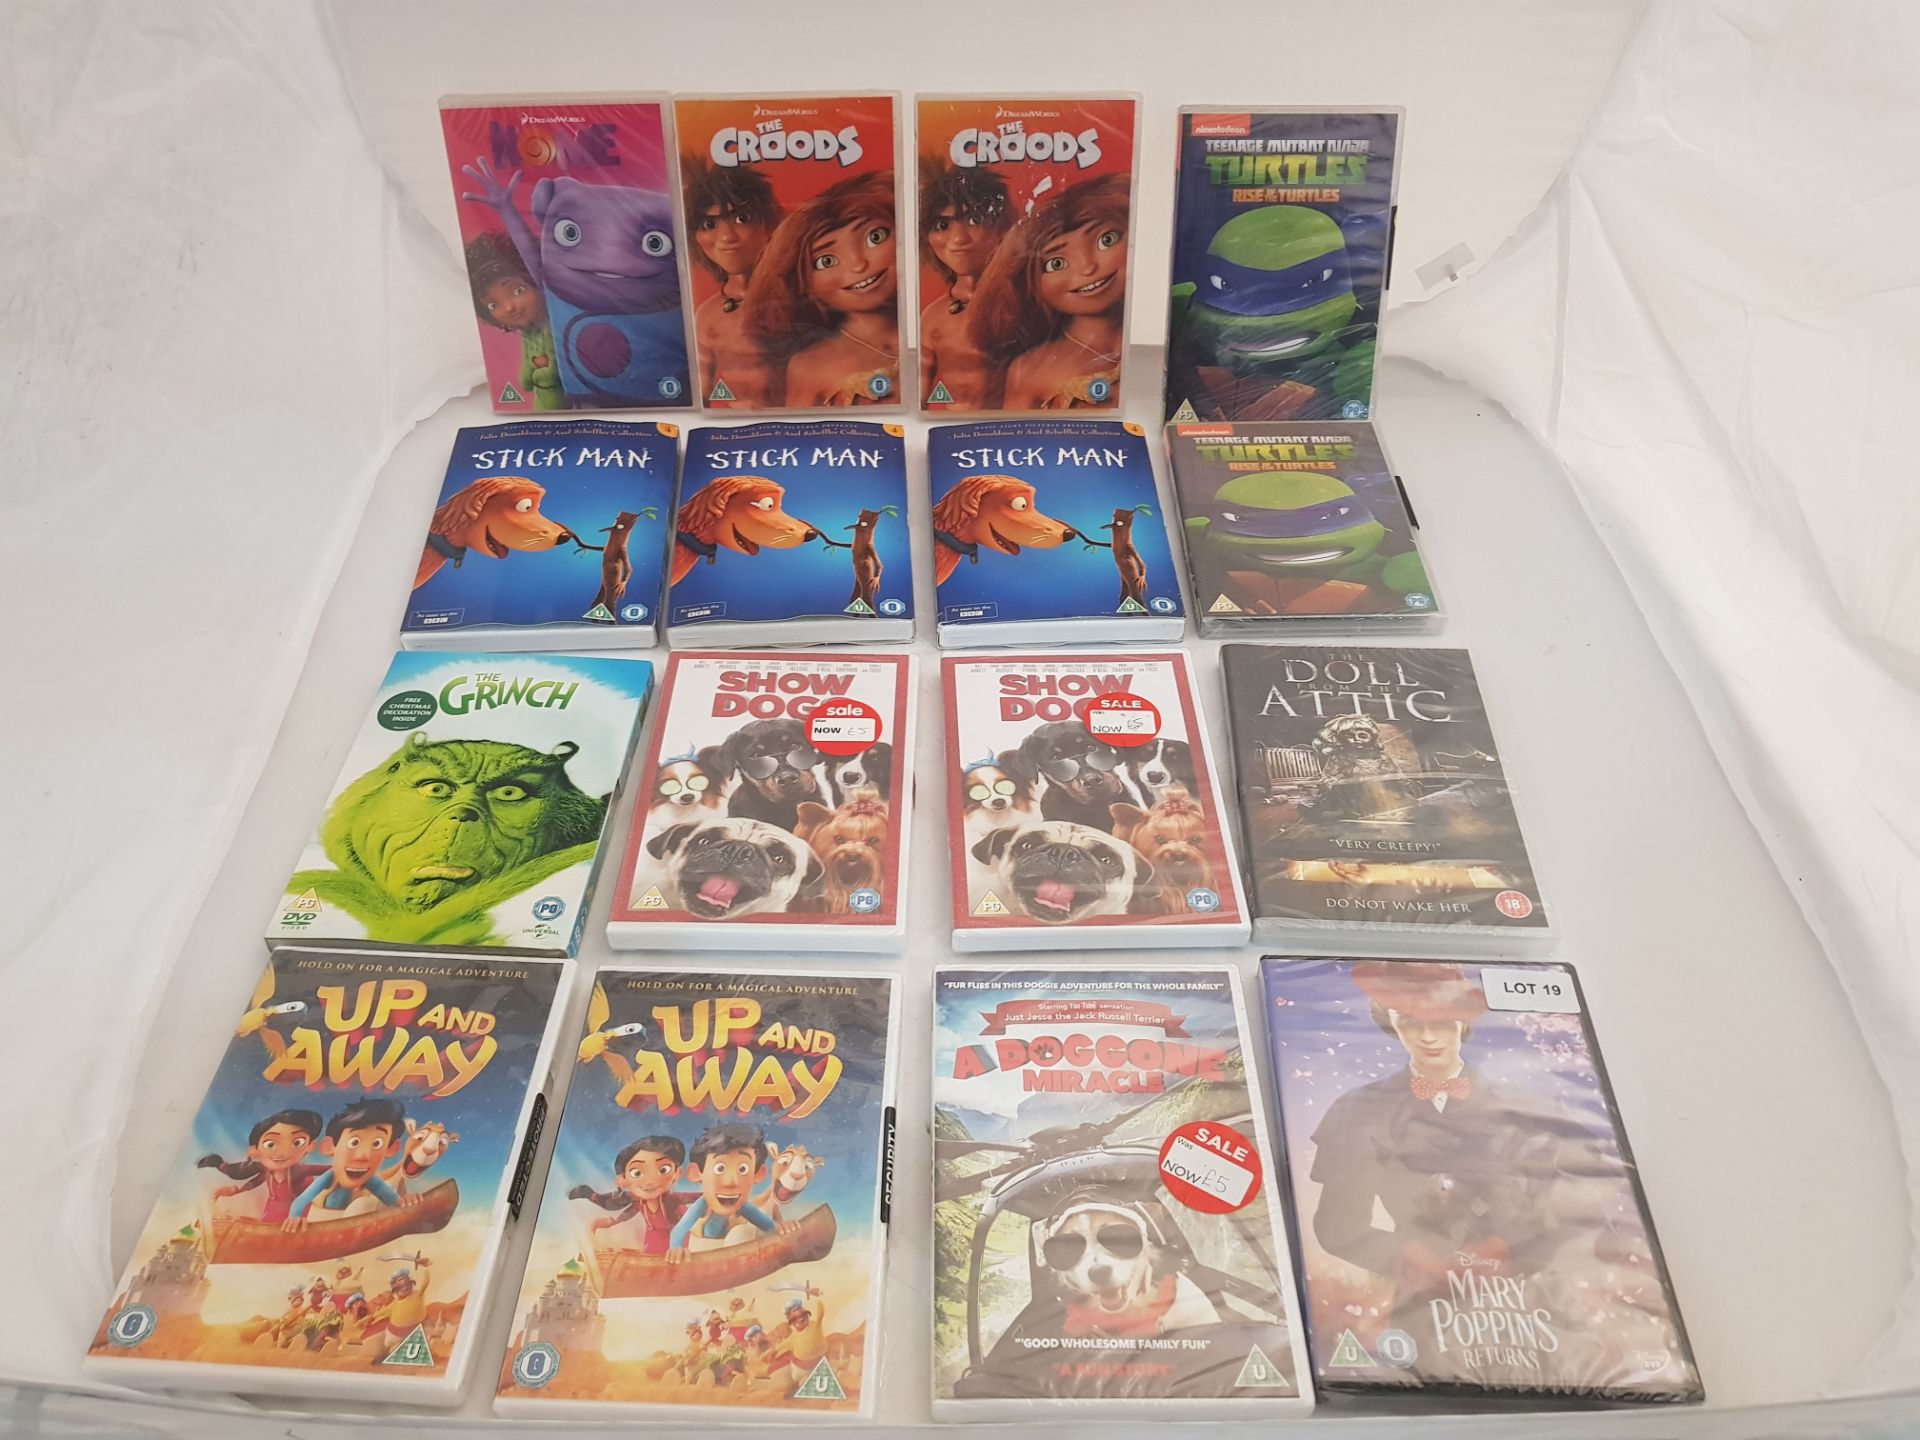 16 x Assorted DVDs to included Nome, The Croods, Teenage mutant ninja turtles, Stick man, The Grin..